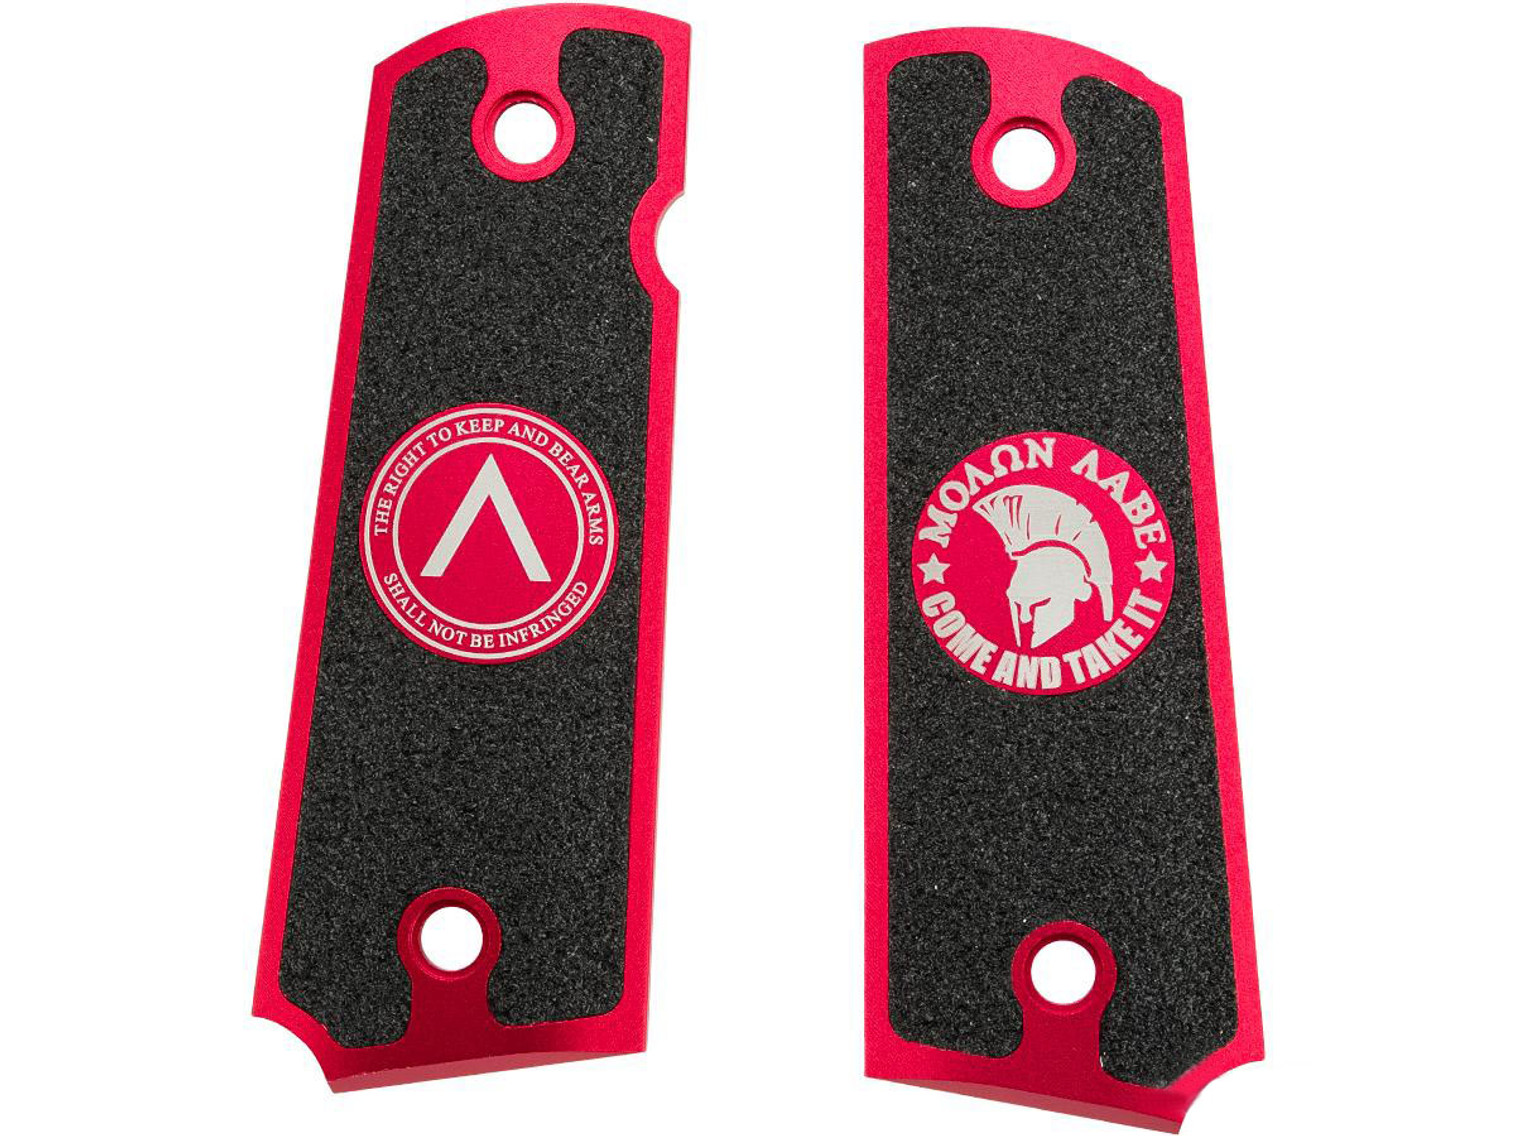 Angel Custom CNC Machined Tac-Glove Universal Grips for 1911 Series Airsoft Pistols (Color: Red / Molon Labe)